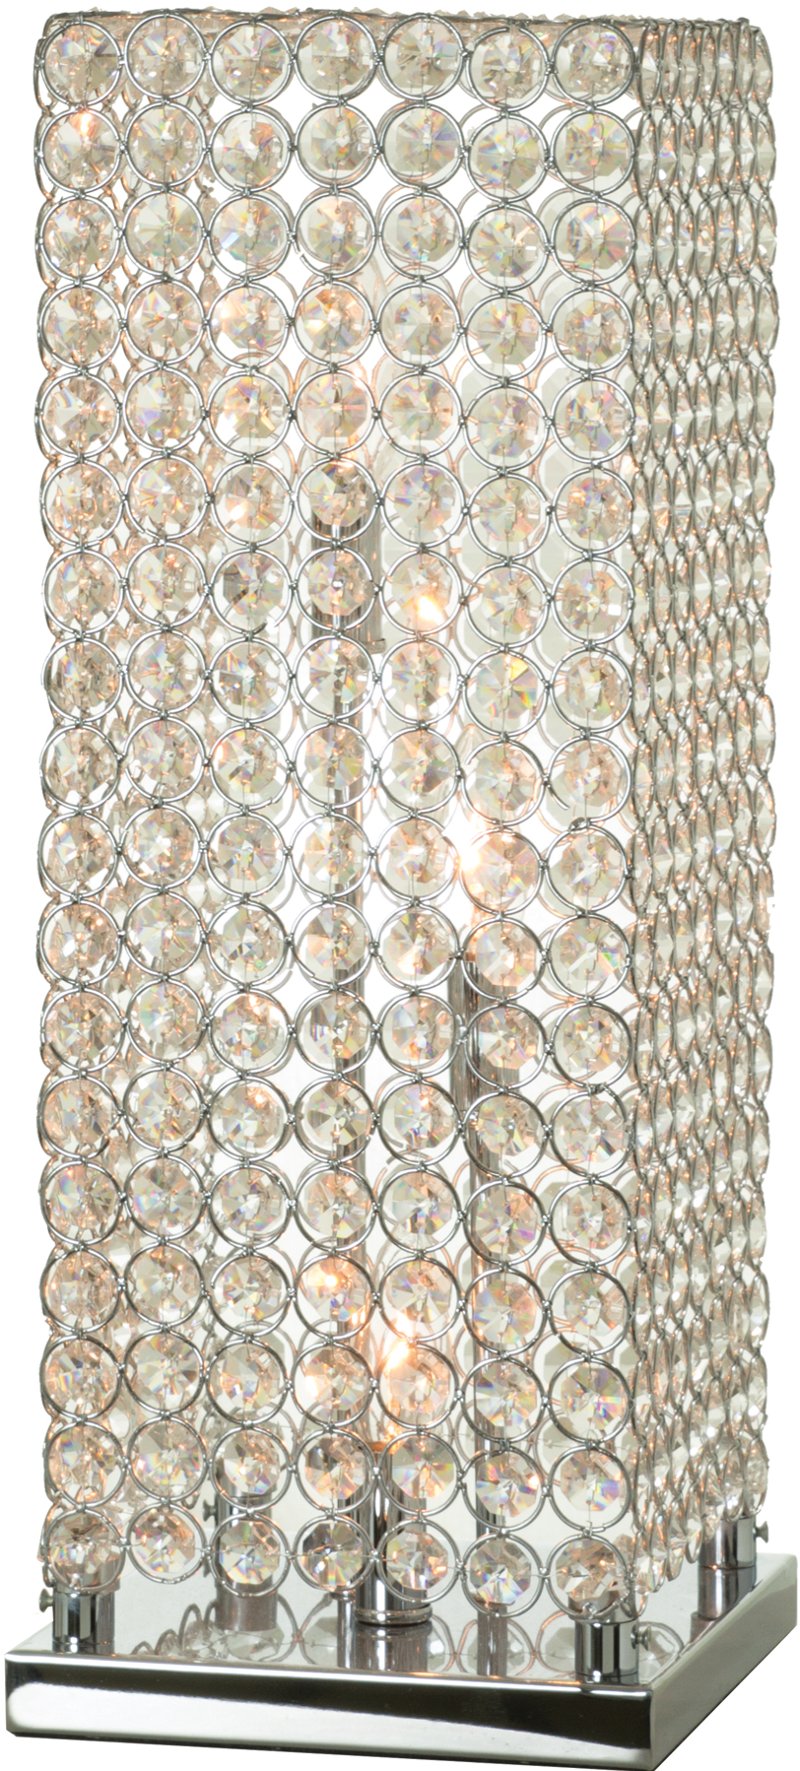 Metal Chrome Table Lamp With Crystal, Lamp Crystal Shade